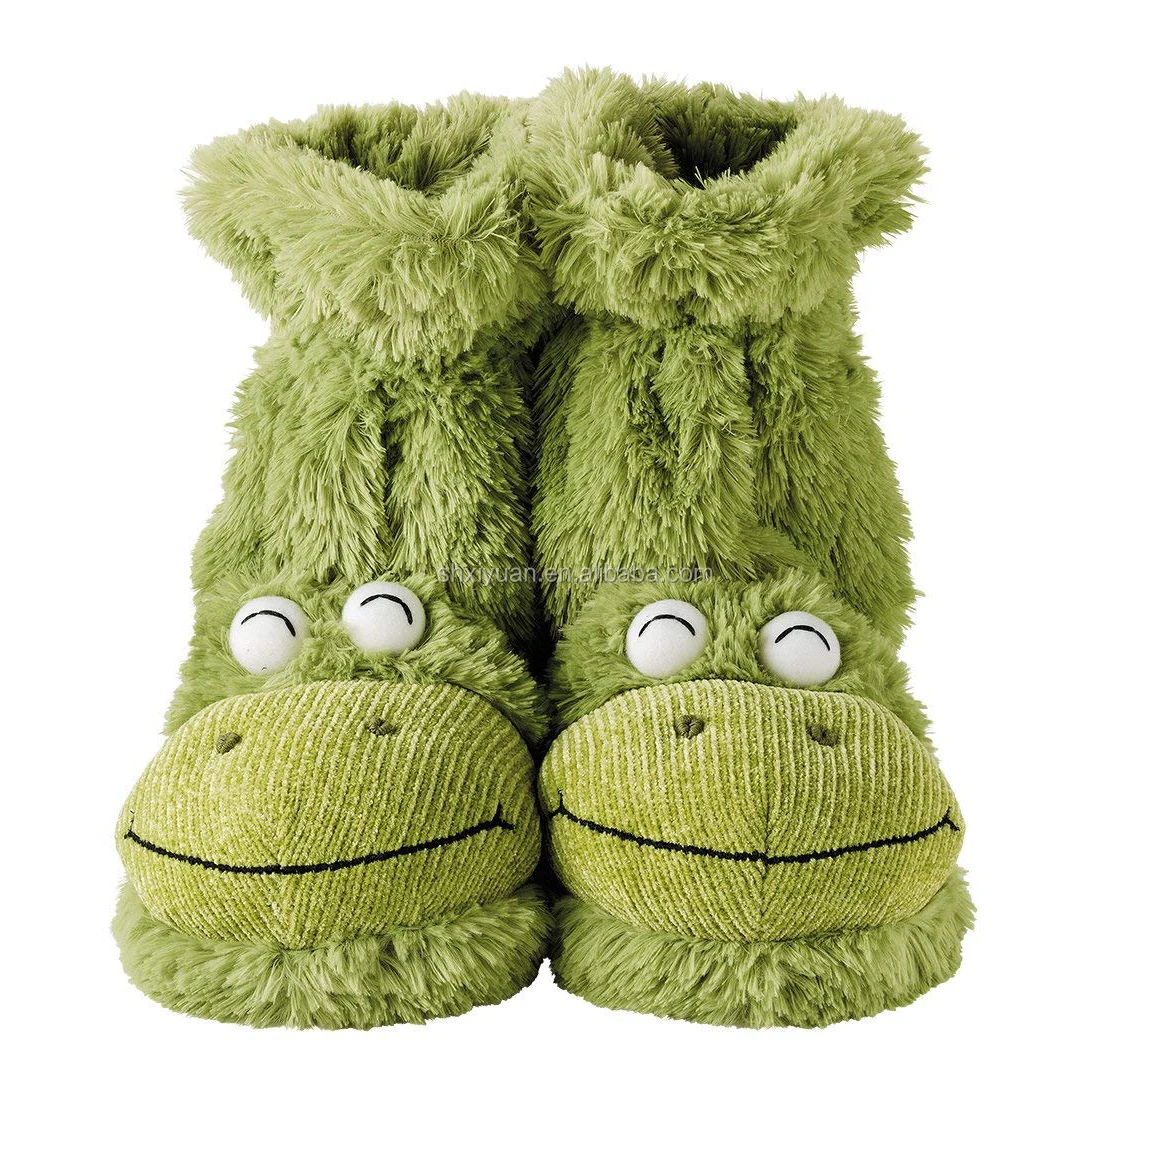 3d Stuffed Animal Slippers Frog Boot Plush Baby Shoes - Buy Plush Baby  Shoes,Stuffed Animal Plush Baby Shoes,Frog Boot Plush Baby Shoes Product on  